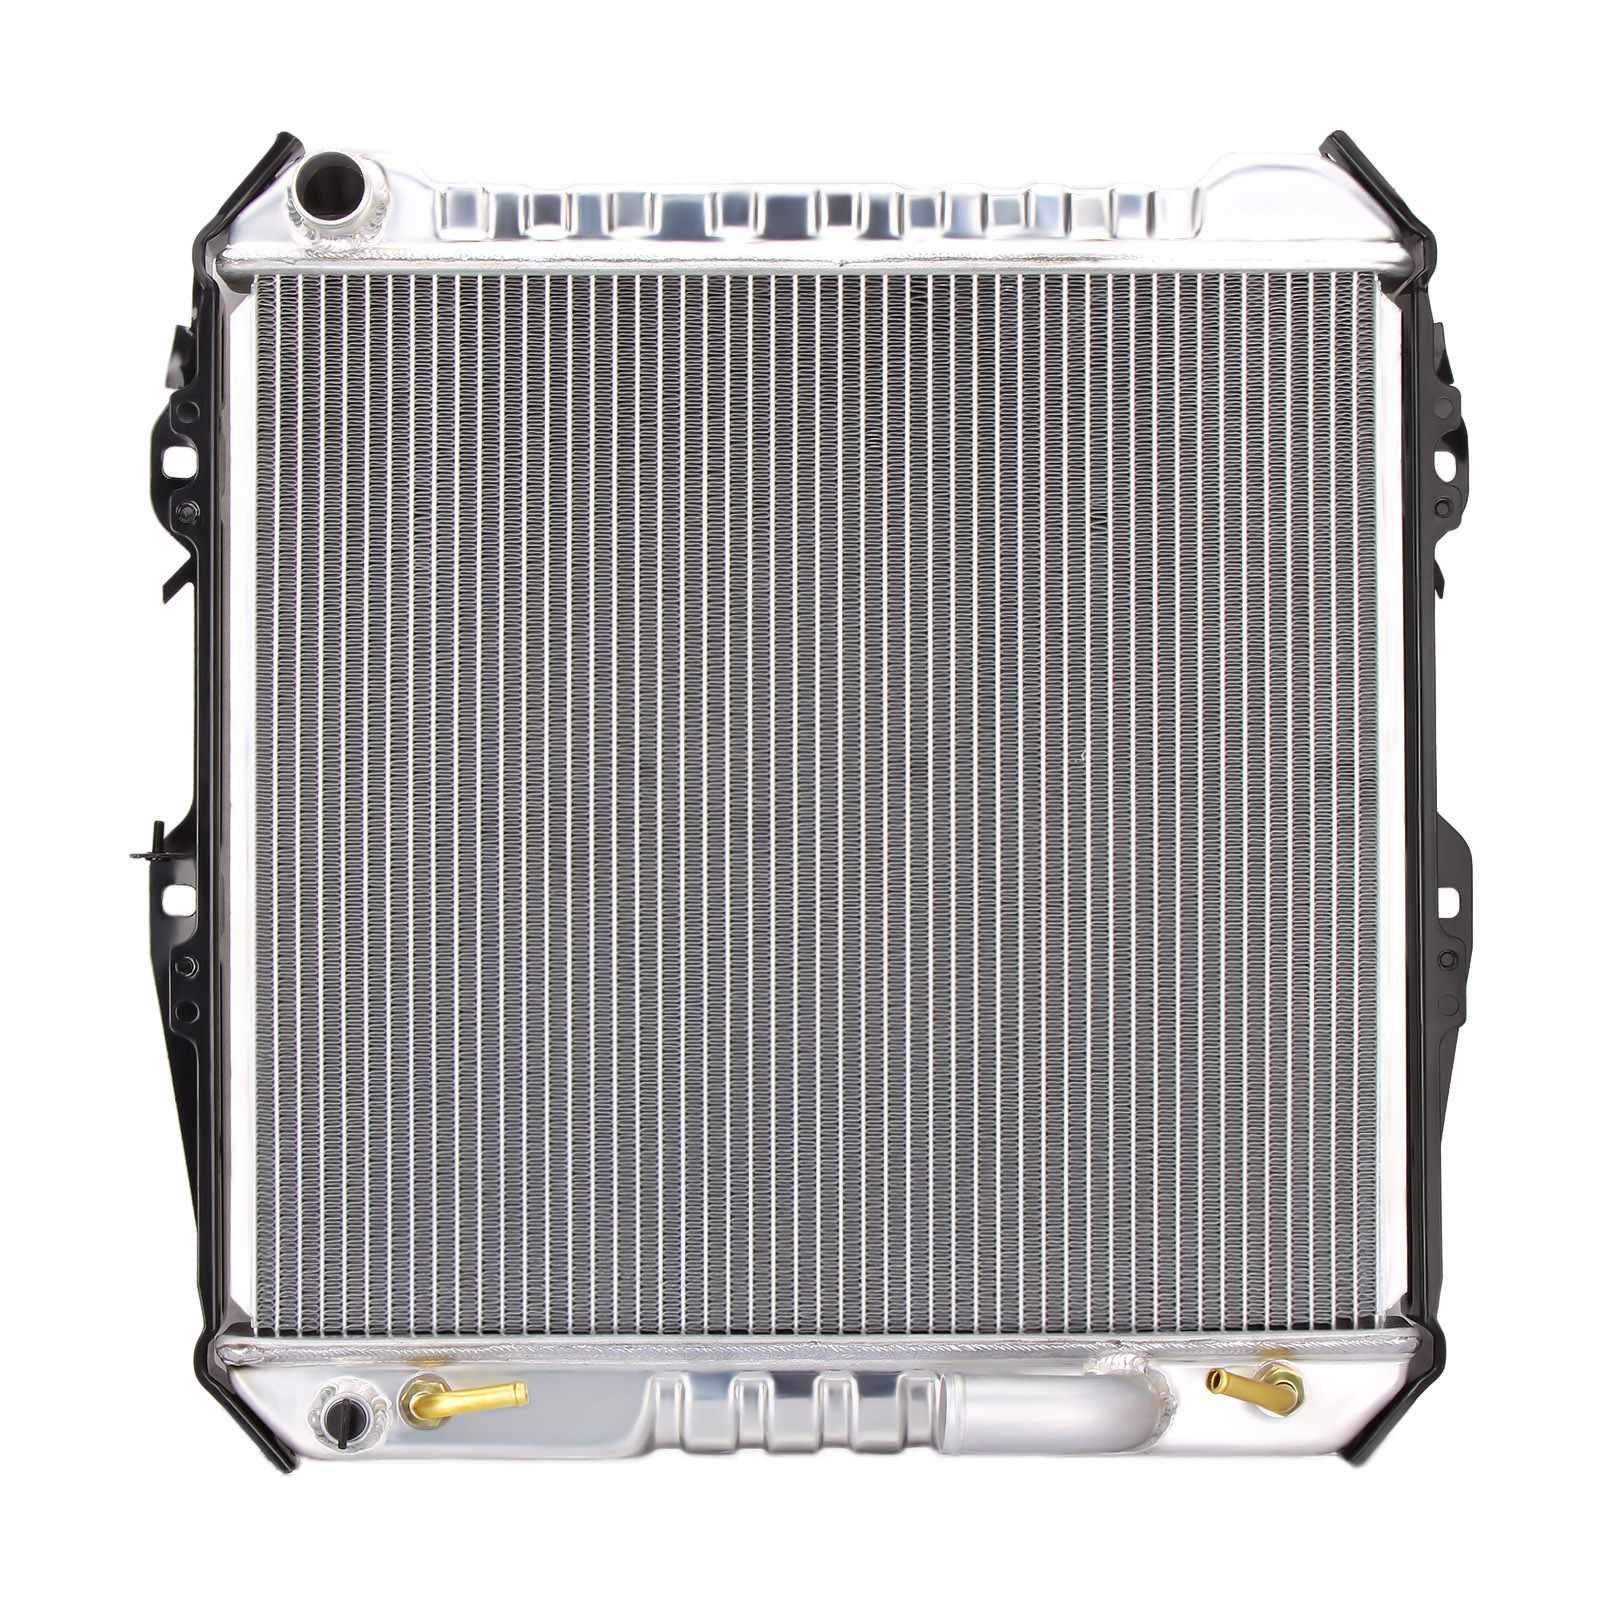 Radiator For Toyota Surf Hilux LN130 Diesel 1988-1997 Auto/Manual #All Aluminum